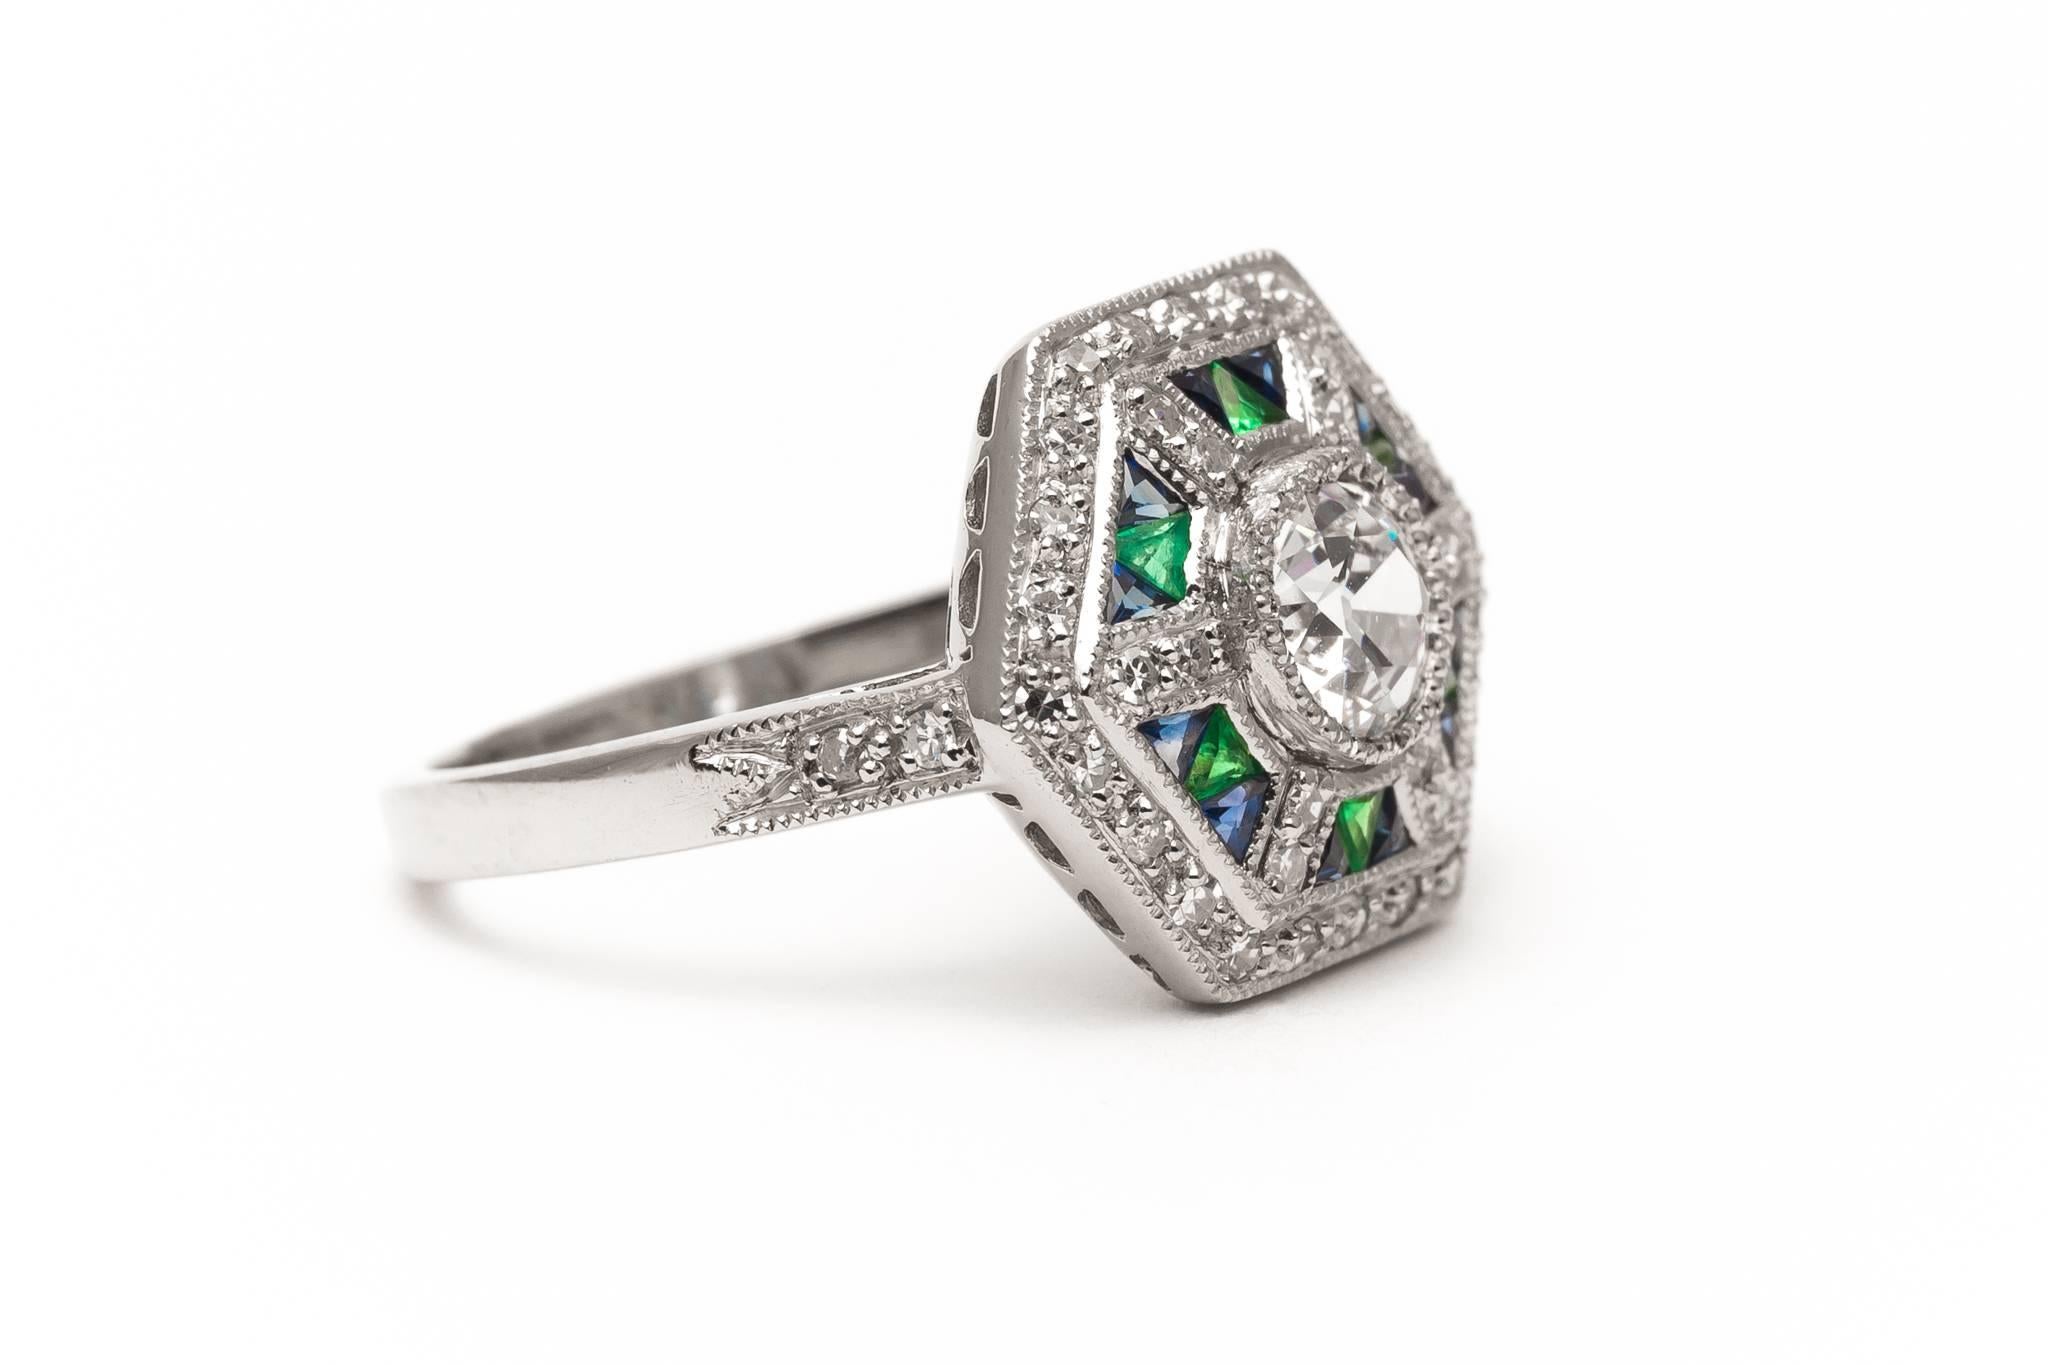 A beautiful handmade diamond, sapphire, and emerald ring in luxurious platinum.  Centered by a sparkling antique European cut diamond this ring features a halo of sparkling diamonds and bespoke French cut emerald and sapphires.

Grading as superb VS